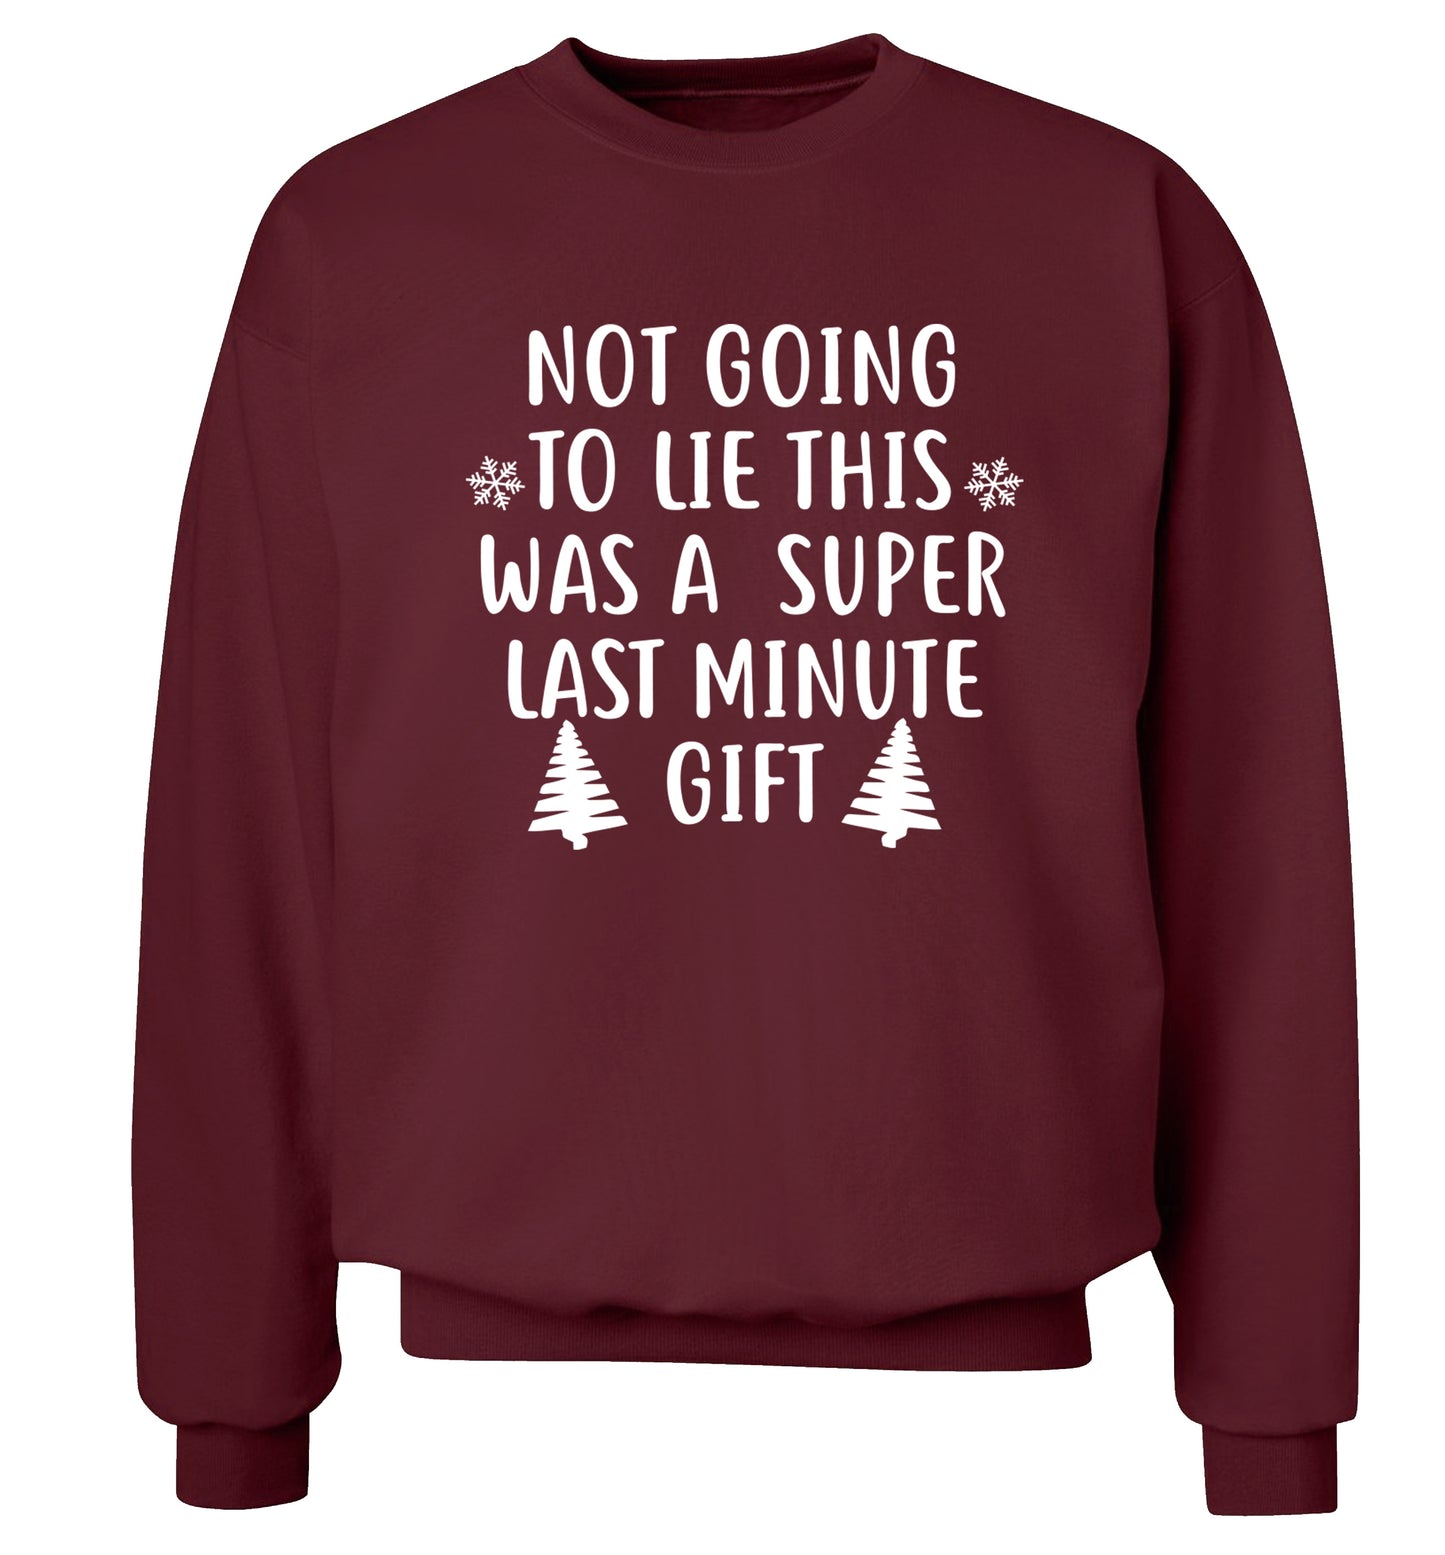 Not going to lie this was a super last minute gift Adult's unisex maroon Sweater 2XL